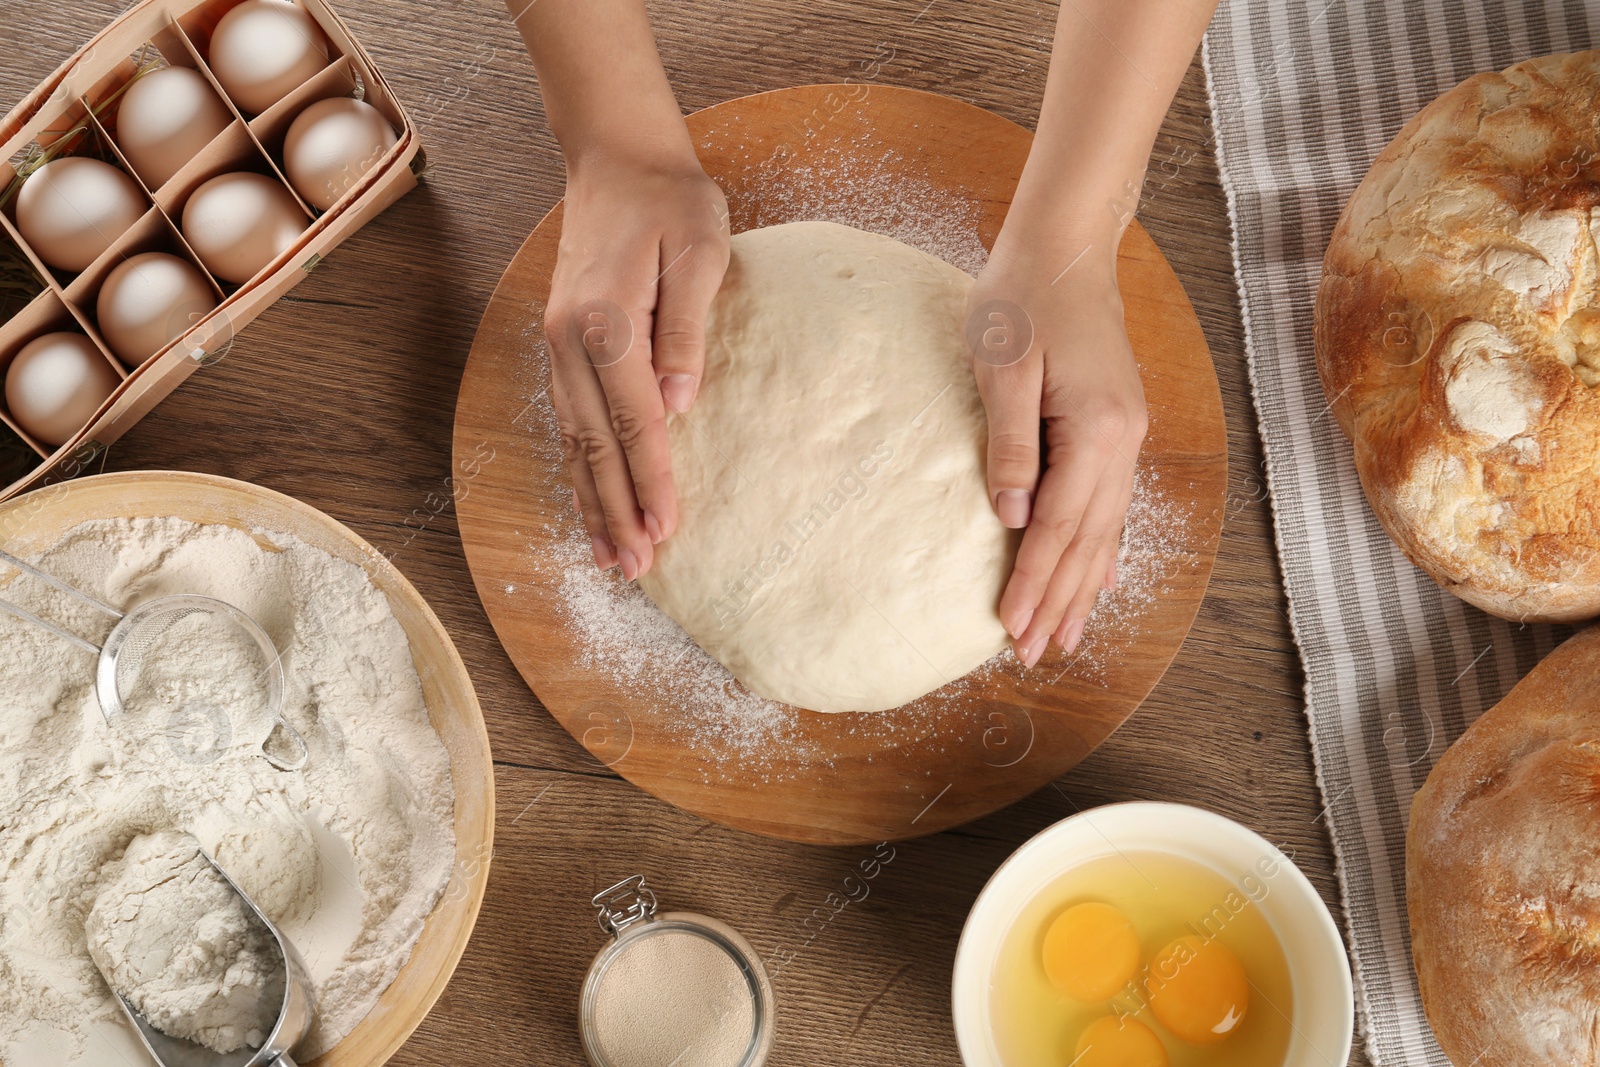 Photo of Female baker preparing bread dough at kitchen table, top view